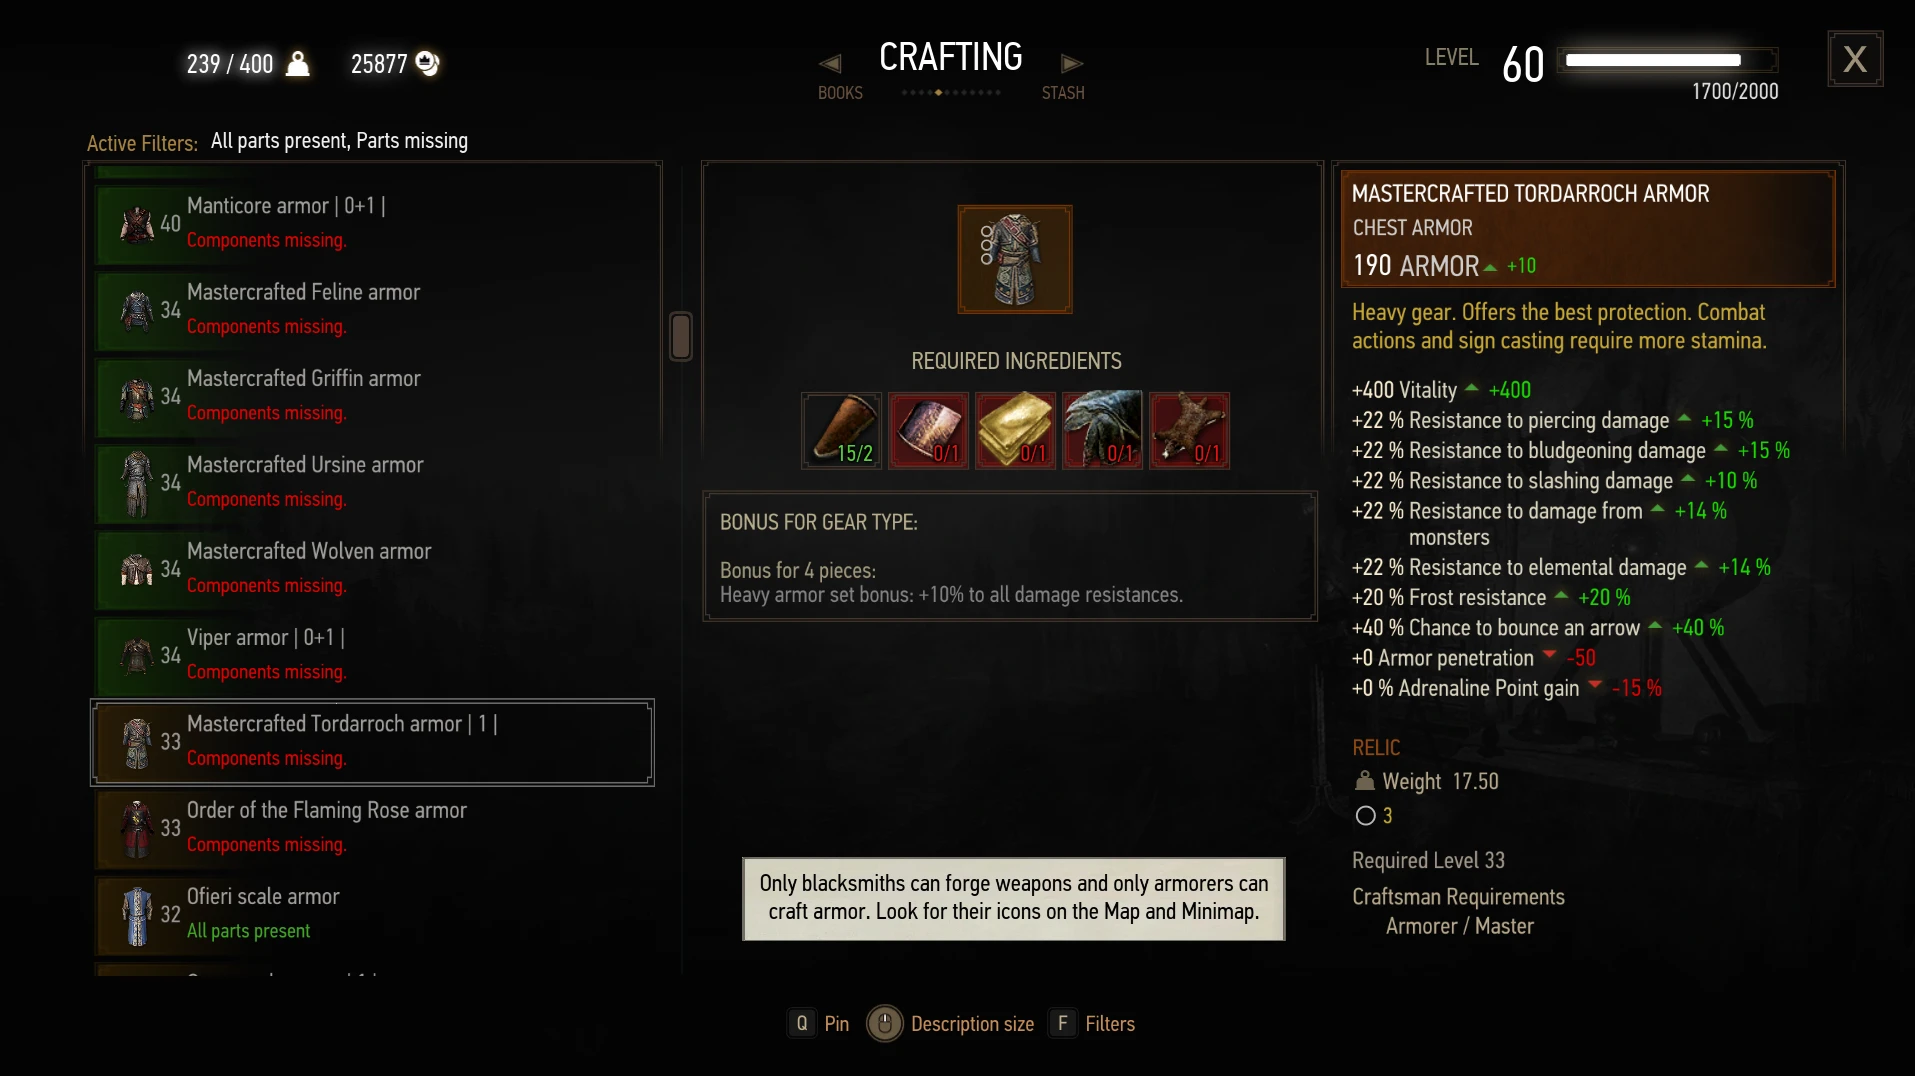 DLC Armor Quests at The Witcher 3 Nexus - Mods and community